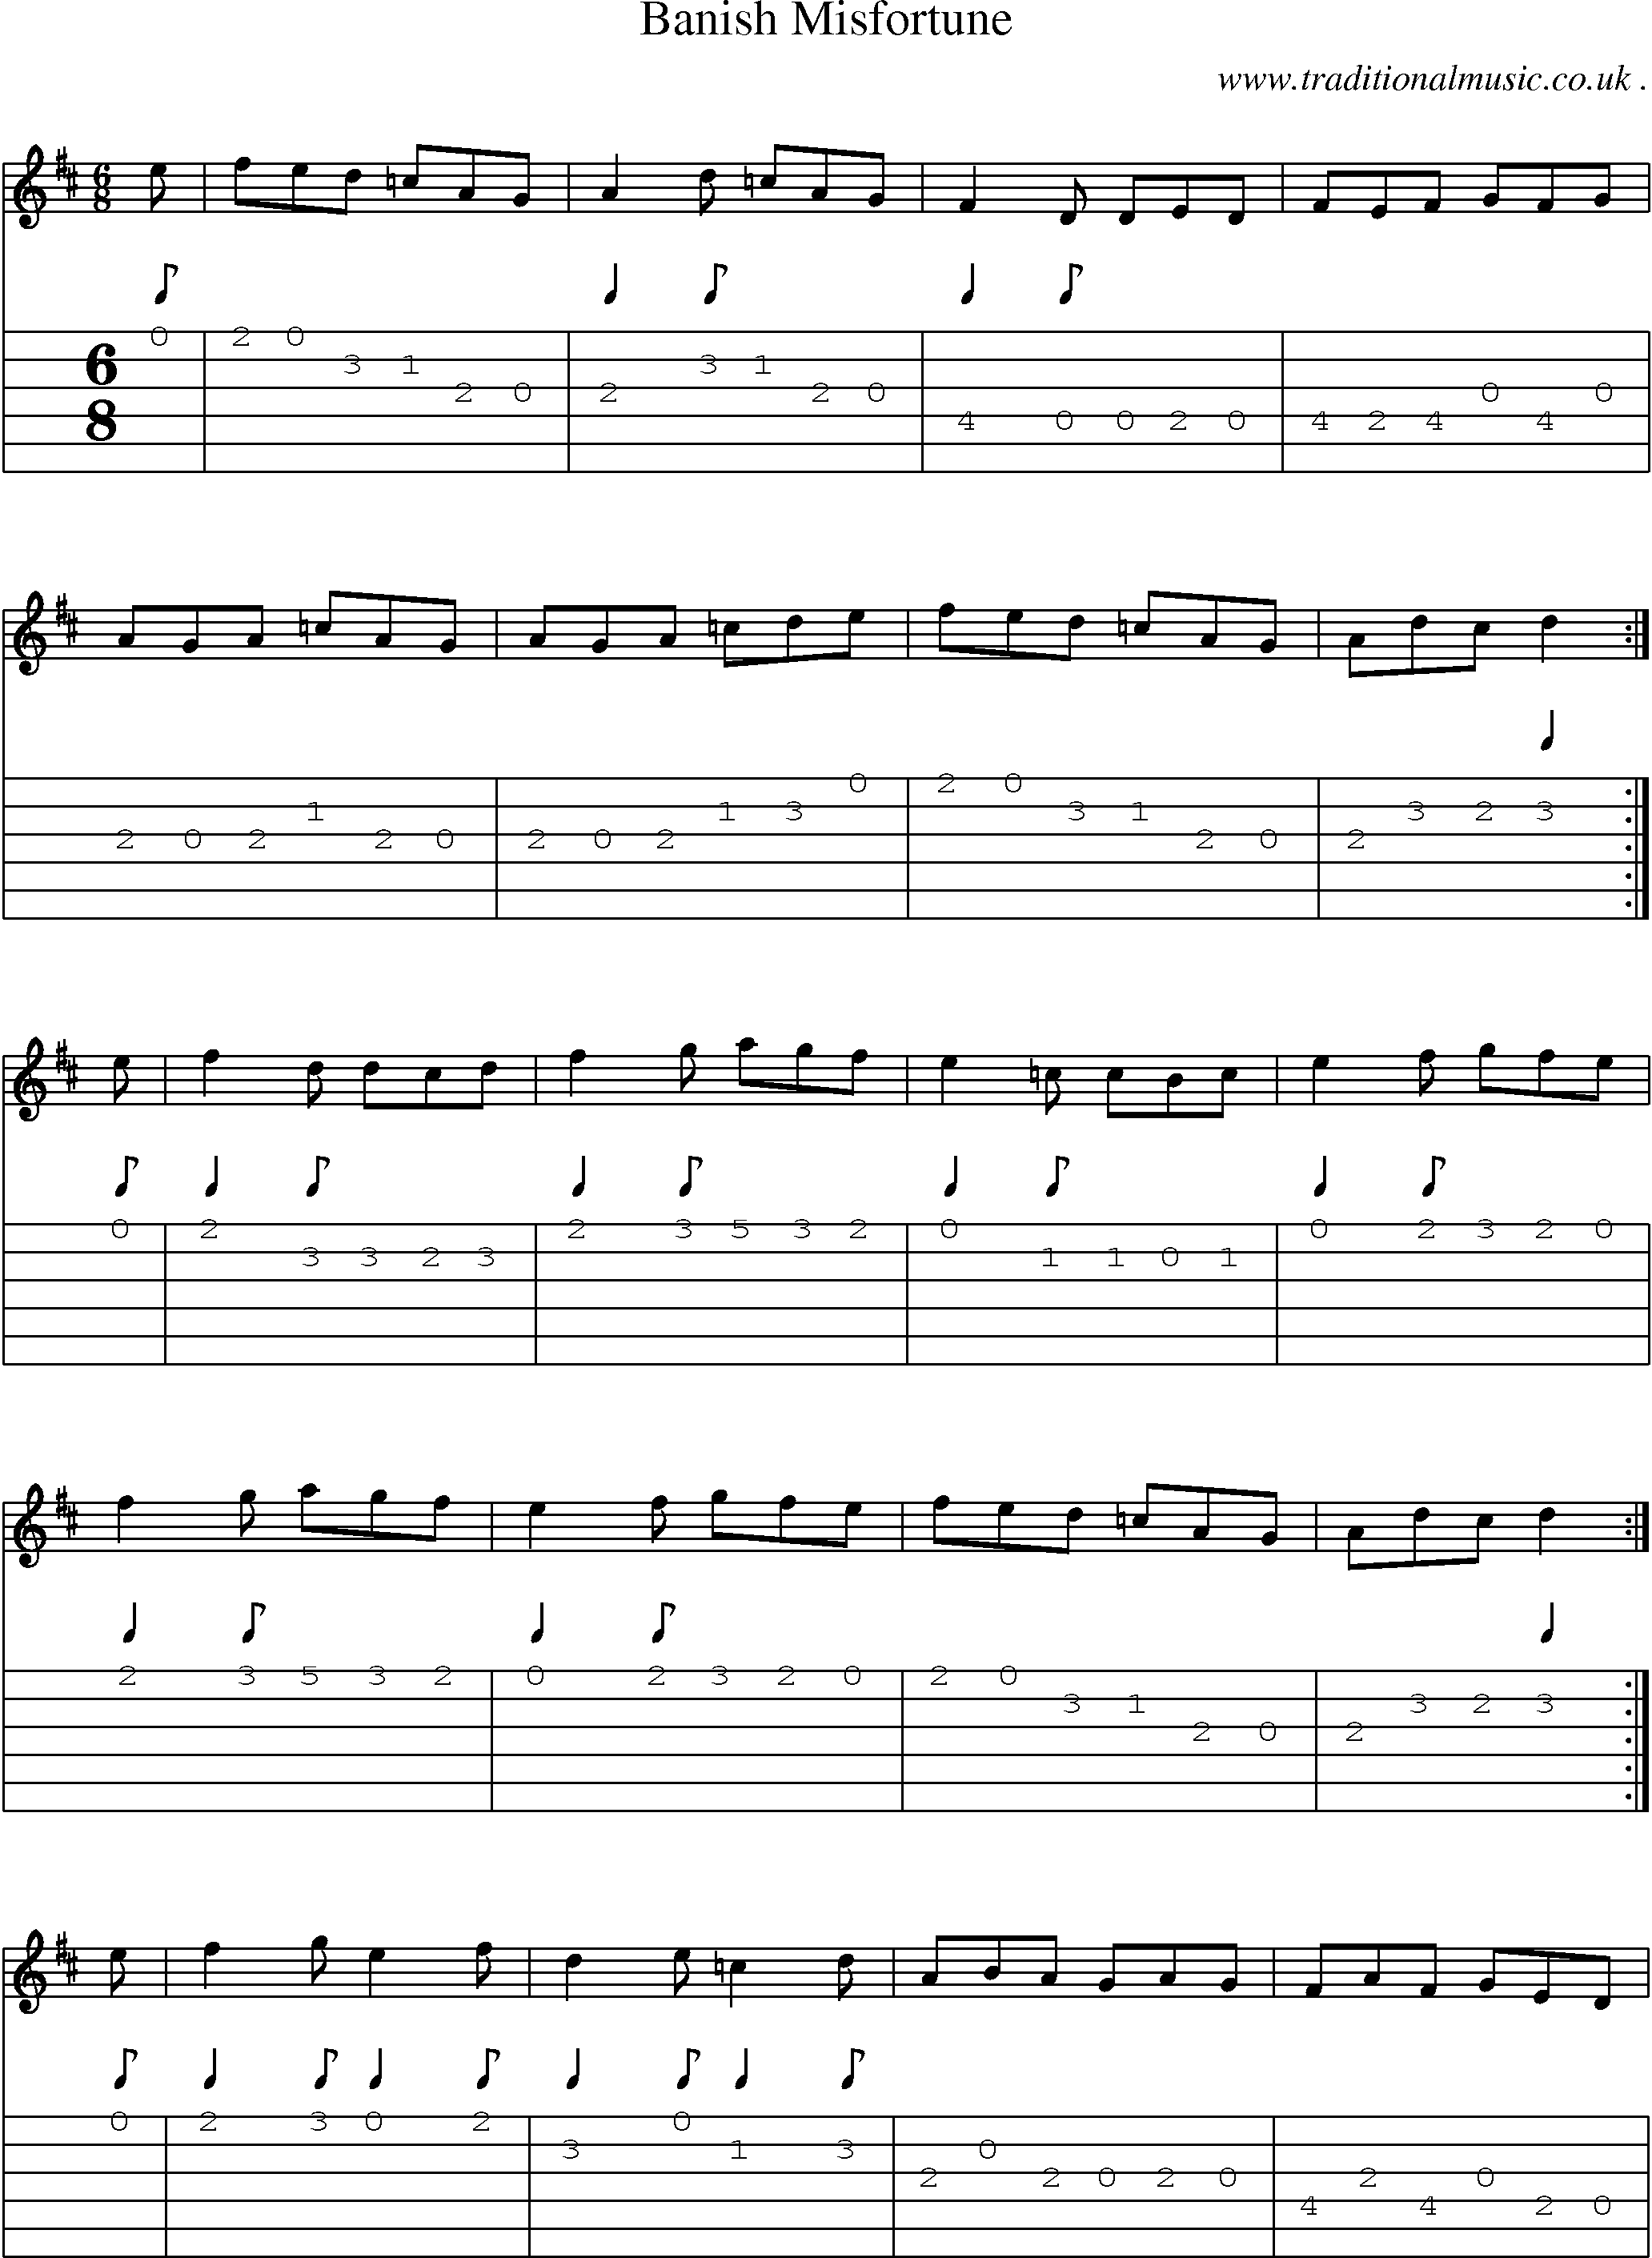 Sheet-Music and Guitar Tabs for Banish Misfortune